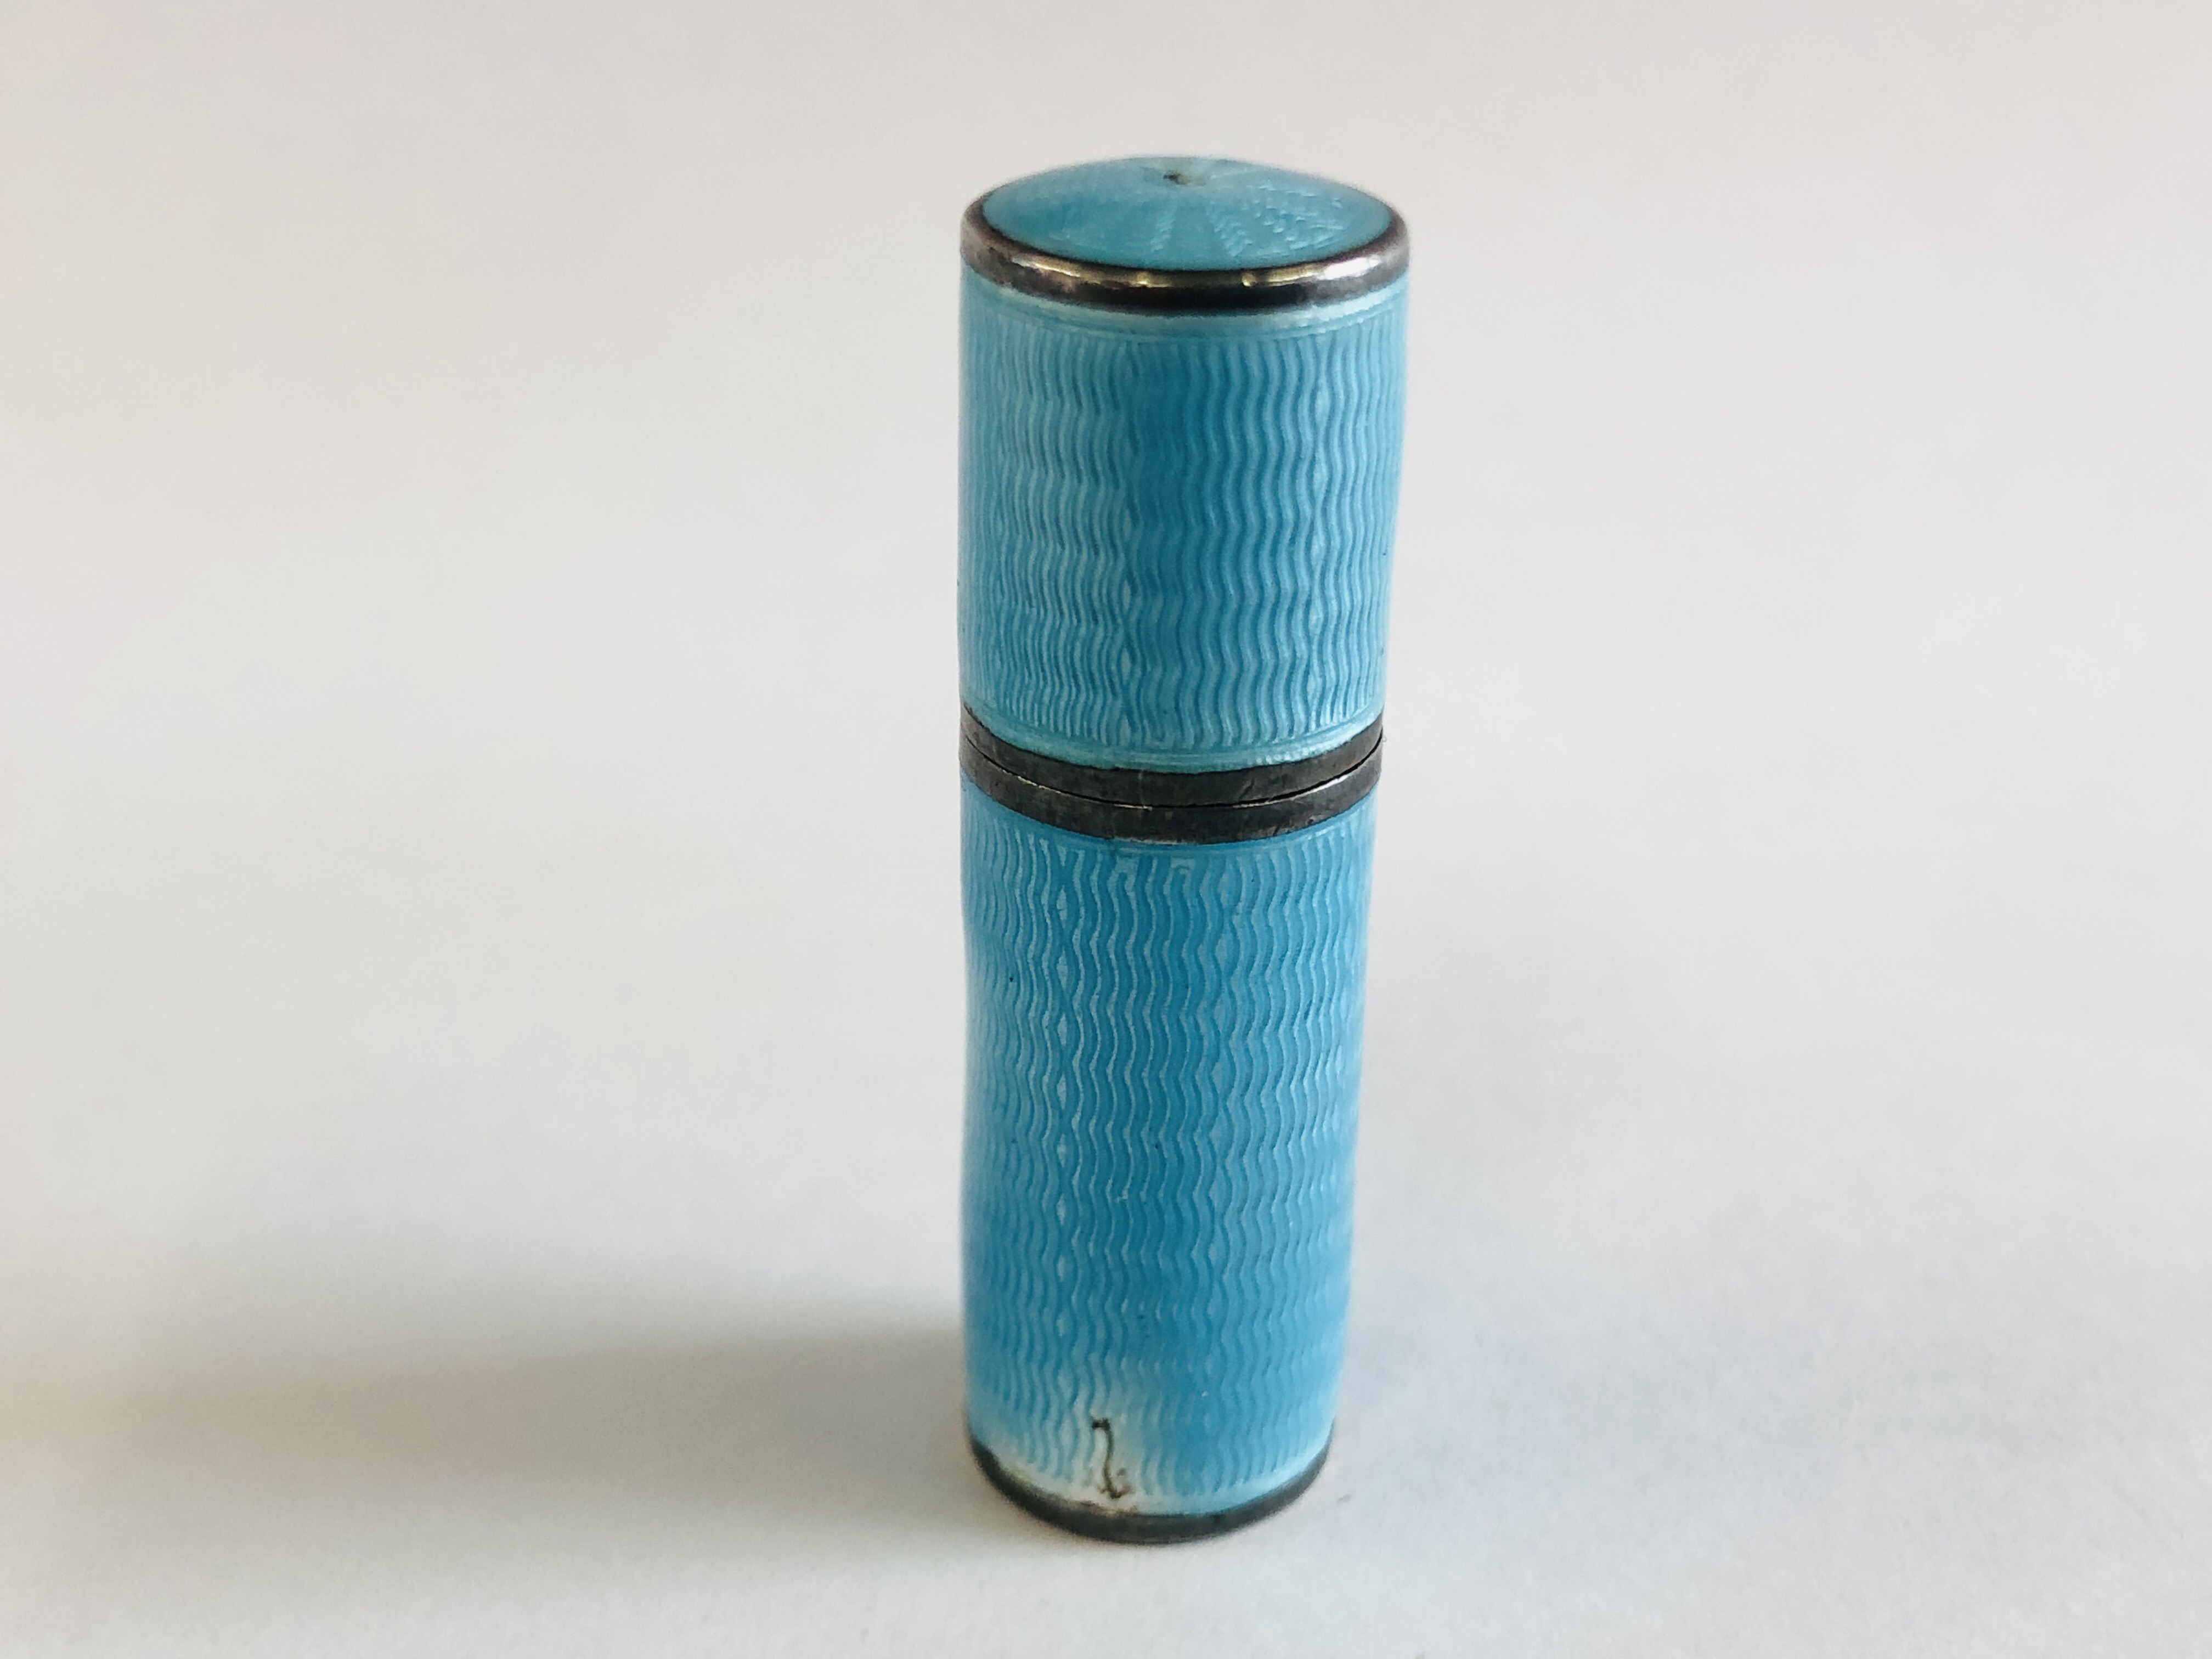 A VINTAGE ENAMELED SILVER CYLINDRICAL THREADED SCENT BOTTLE HOLDER CONTAINING A CLEAR GLASS SCENT - Image 3 of 7